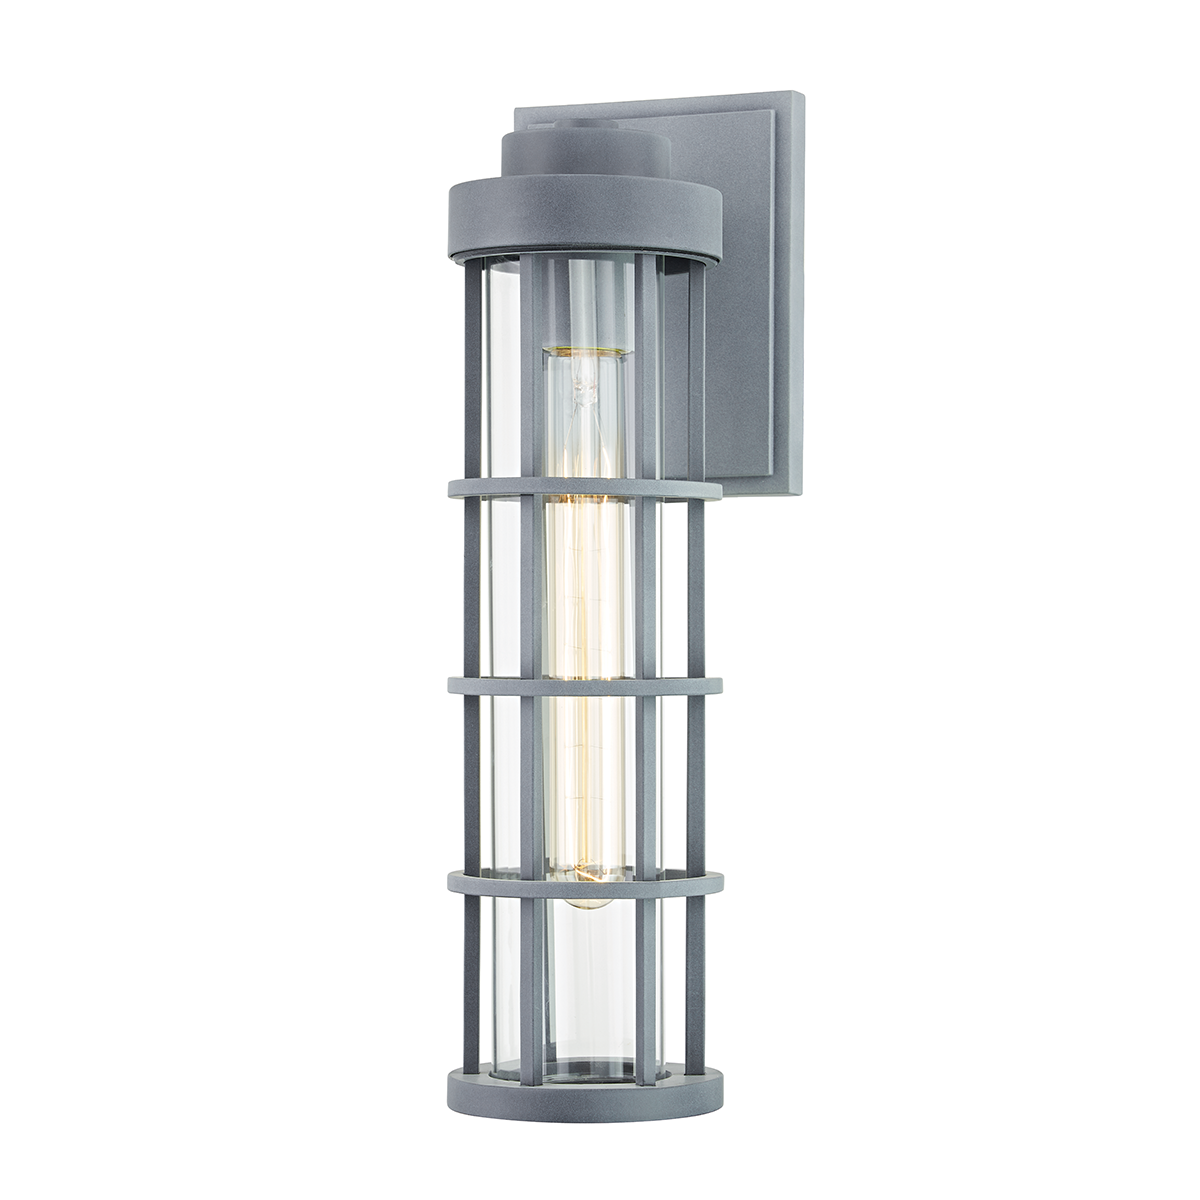 Troy Lighting 1 LIGHT LARGE EXTERIOR WALL SCONCE B2042 Outdoor l Wall Troy Lighting WEATHERED ZINC  